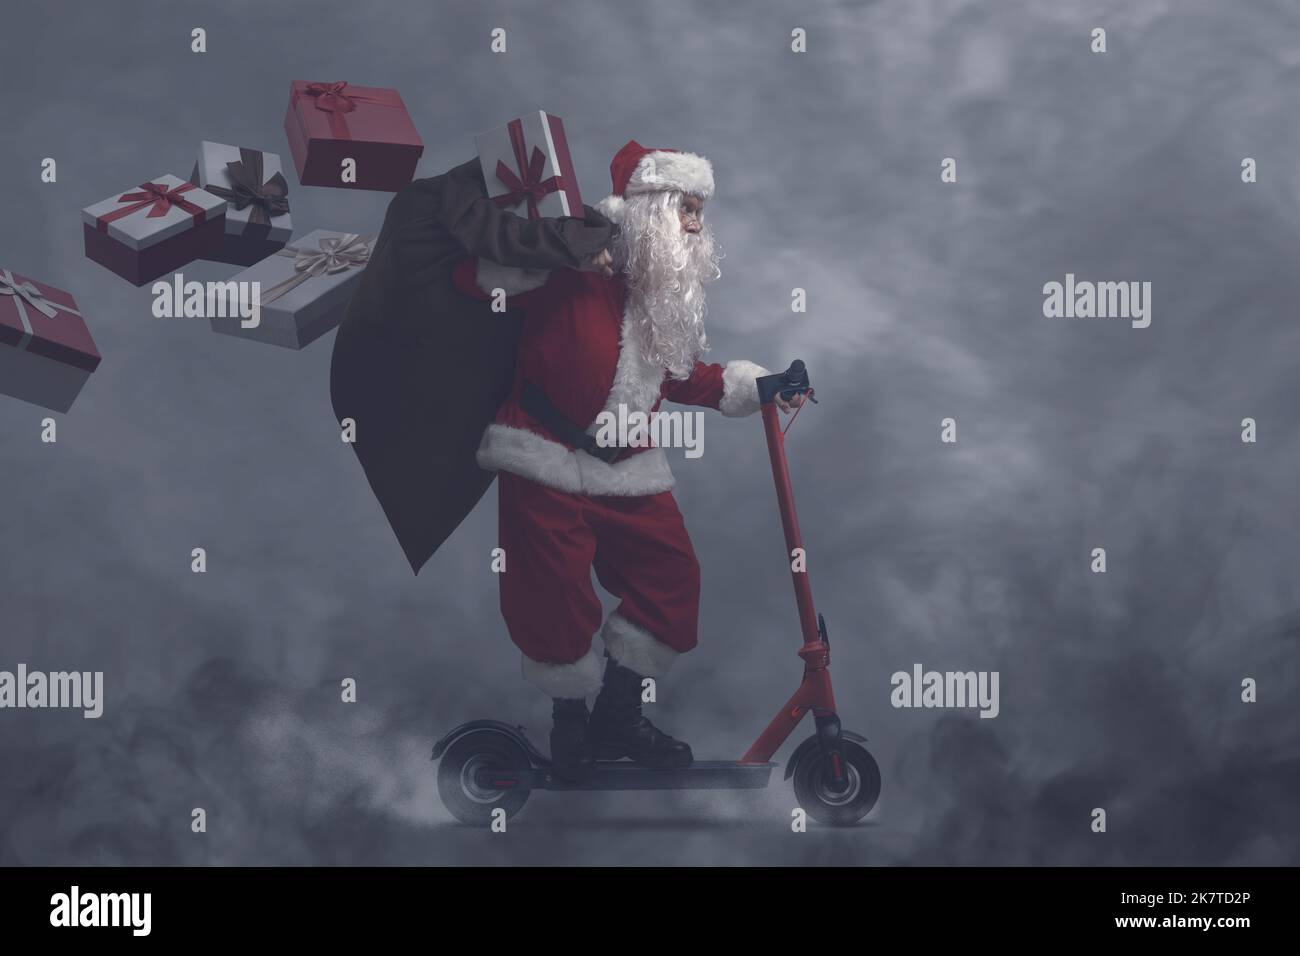 Santa Claus riding a scooter and delivering Christmas gifts, he is surrounded by pollution, smog and toxic gases Stock Photo